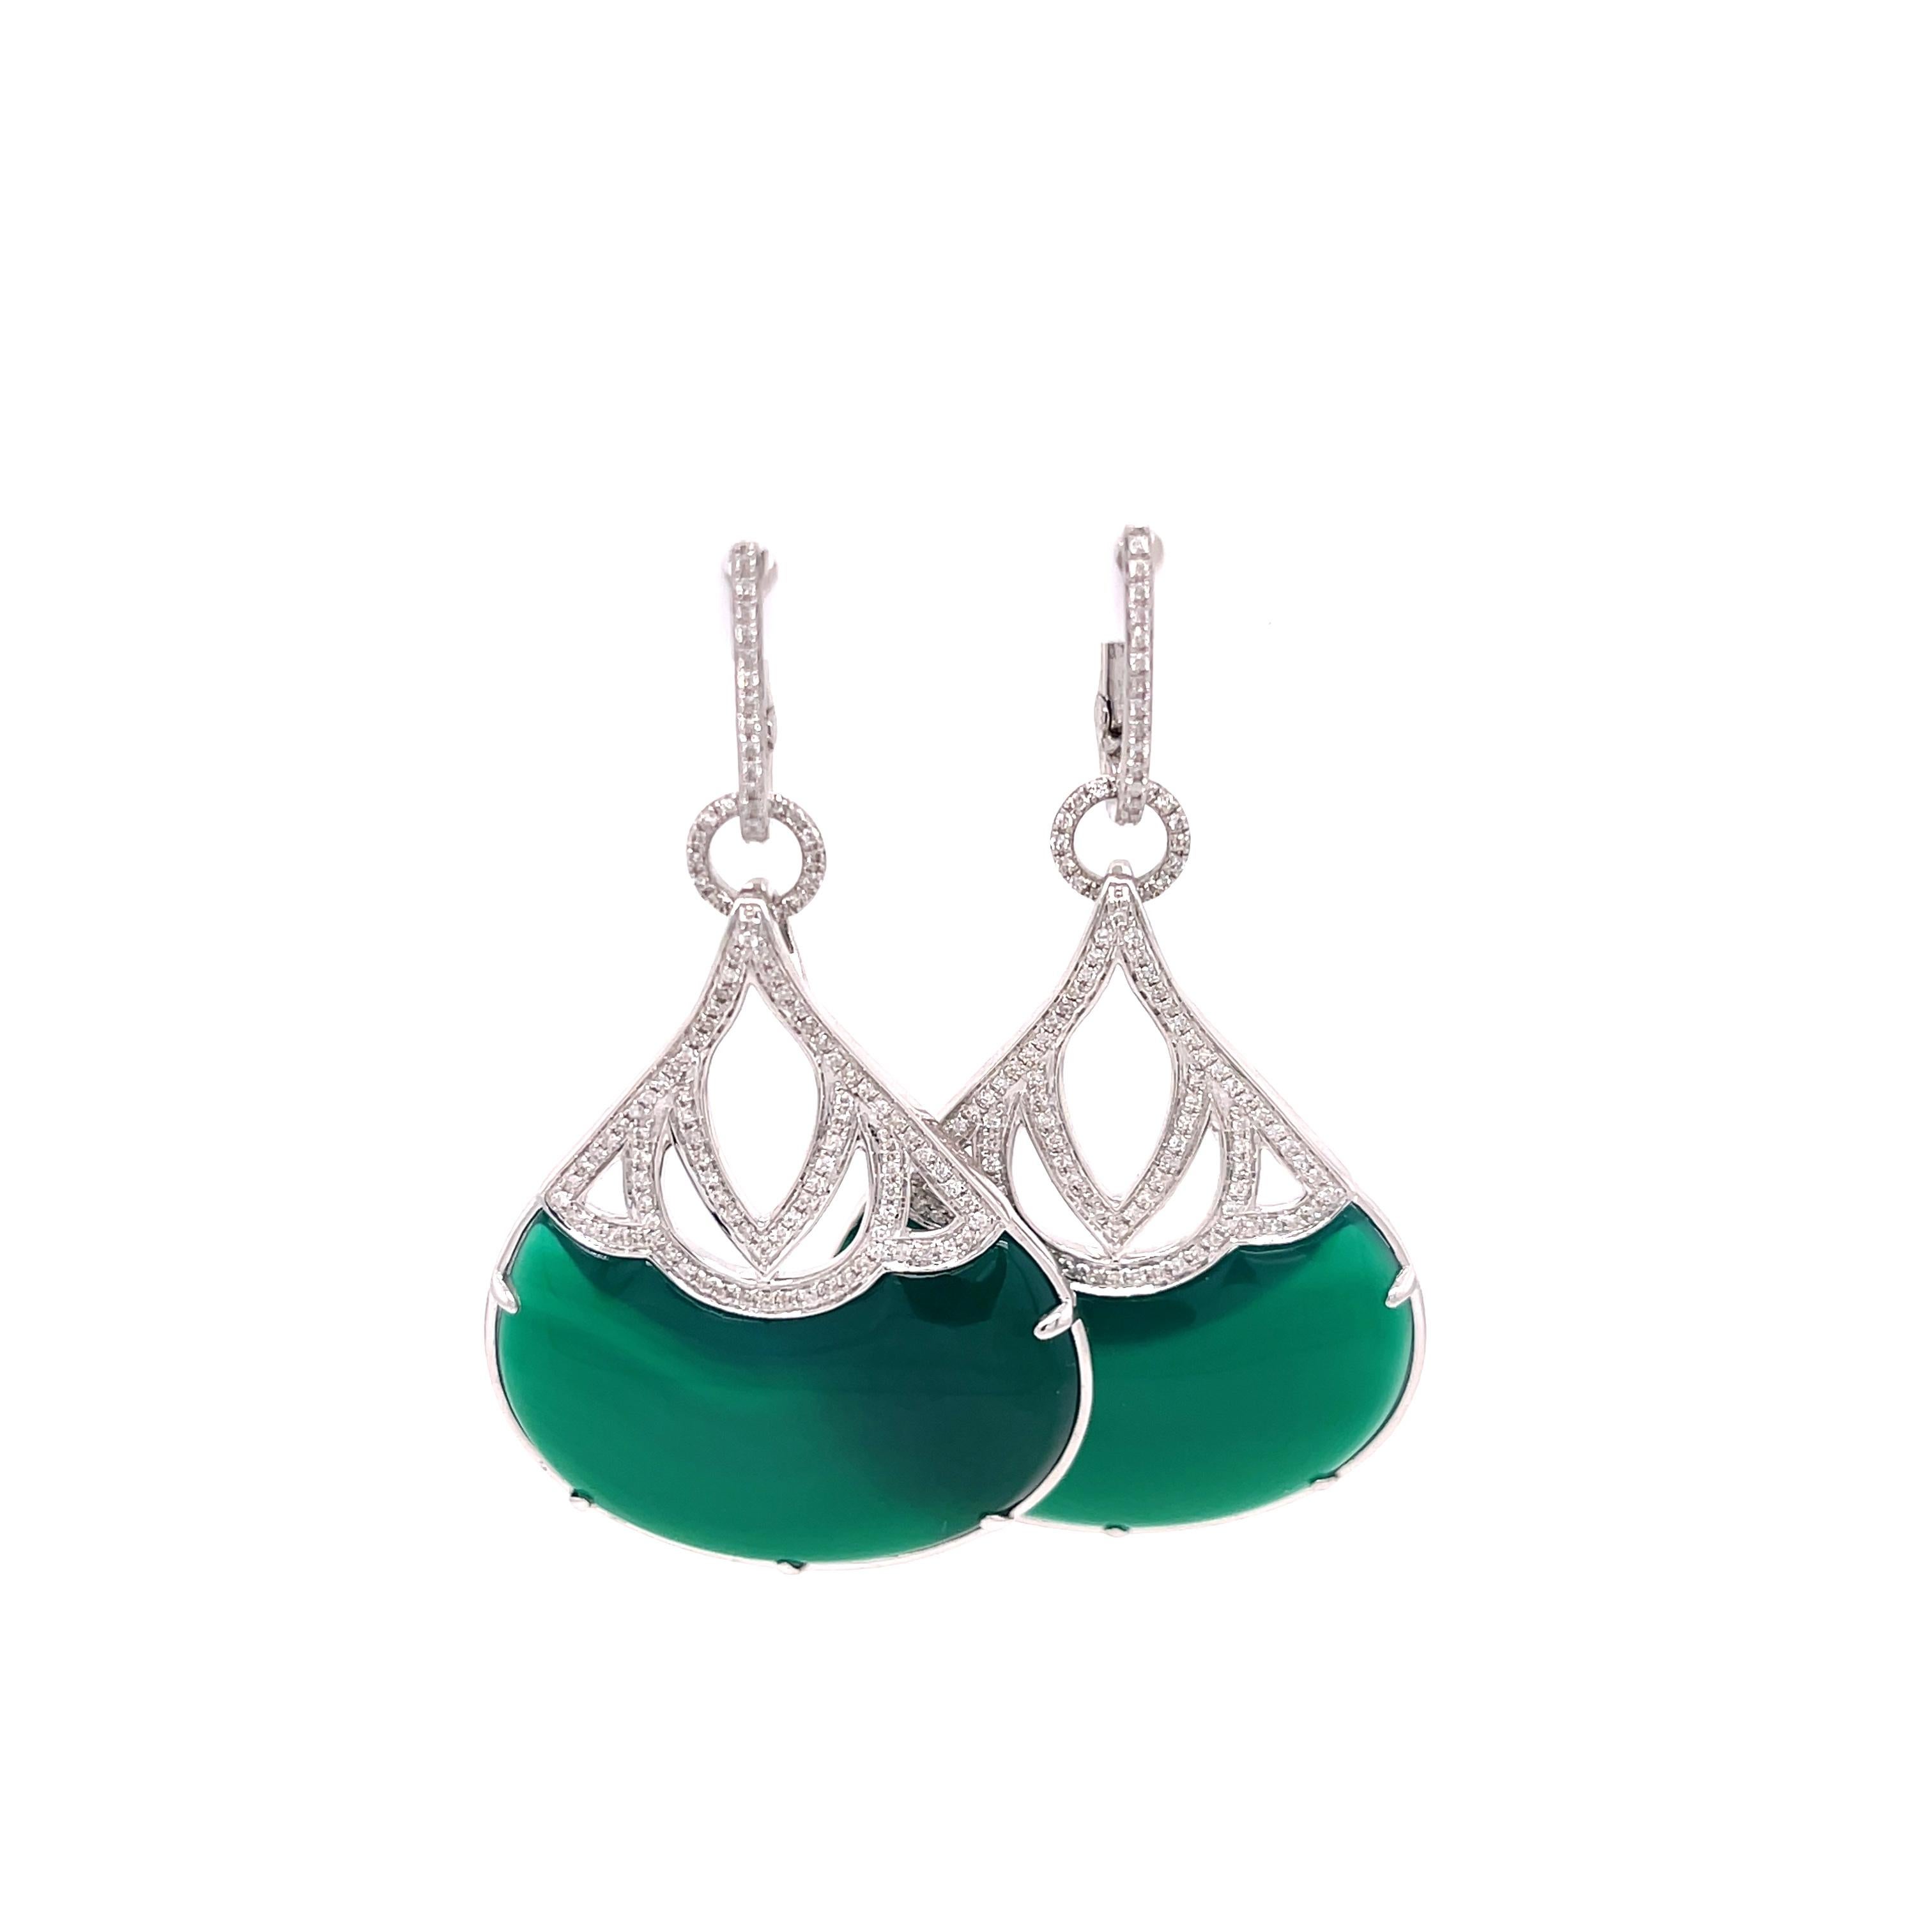 Diamond and green stone dangles in 18K white gold. Stamped 18k 750 A.
